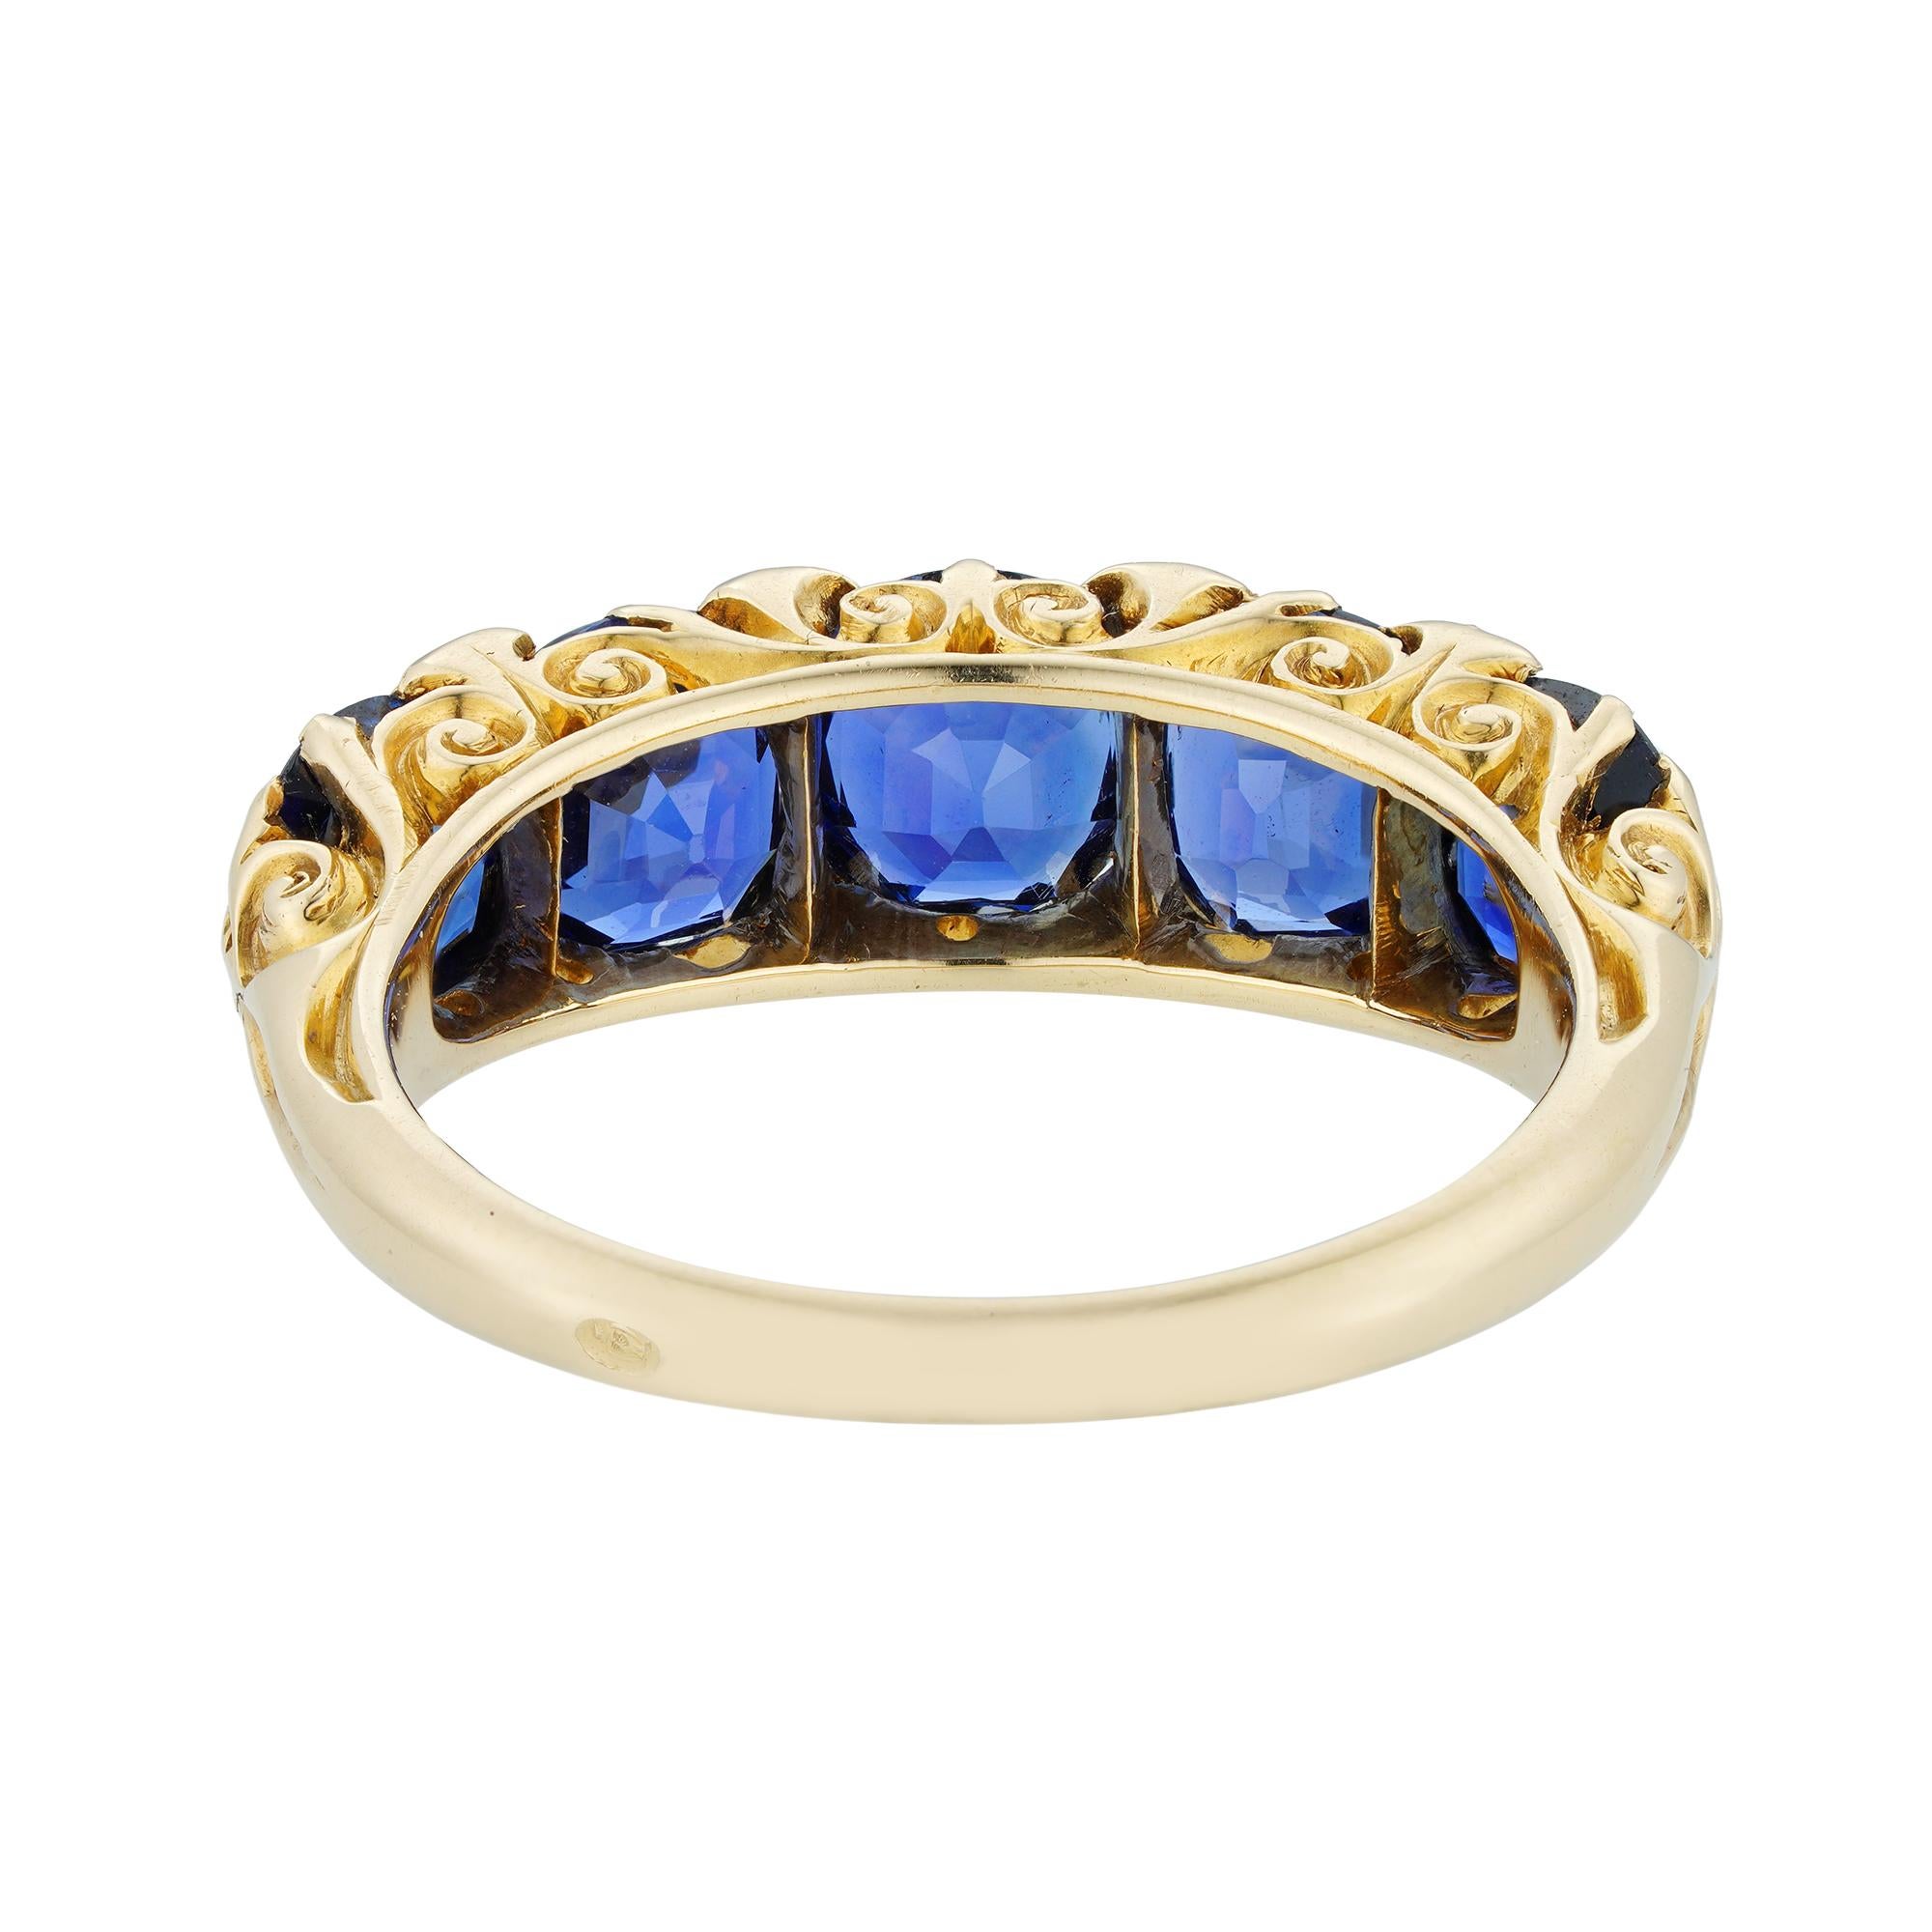 Old Mine Cut Late Victorian Sapphire and Diamond Five-Stone Ring